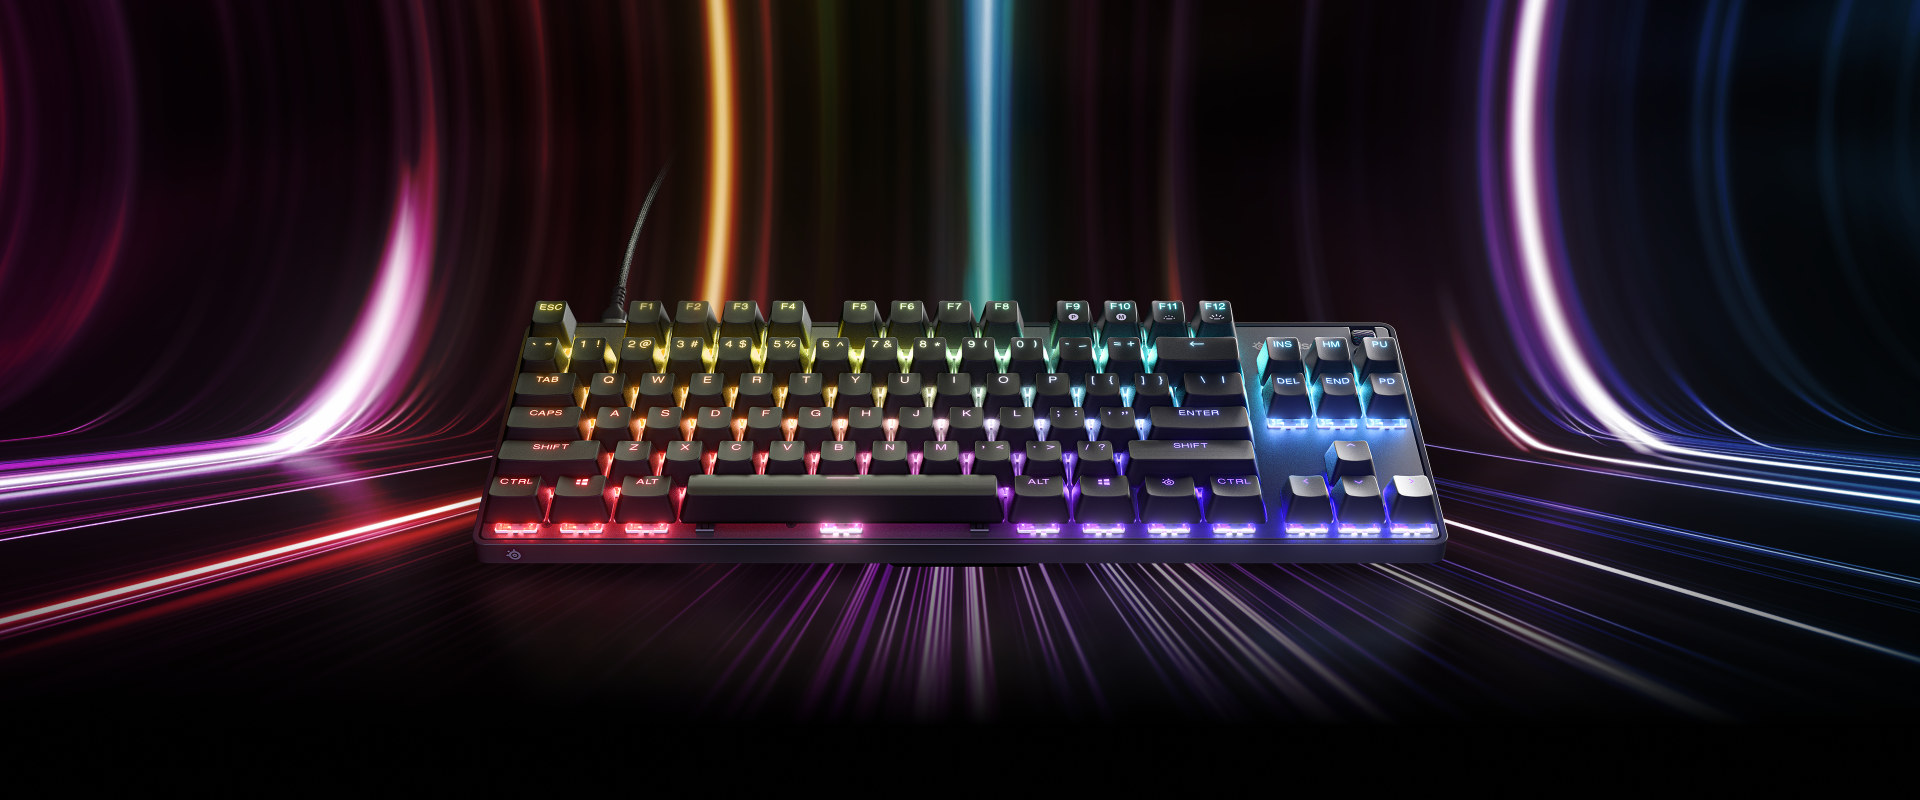 An Apex 9 TKL Keyboard with abstract light beams behind it.